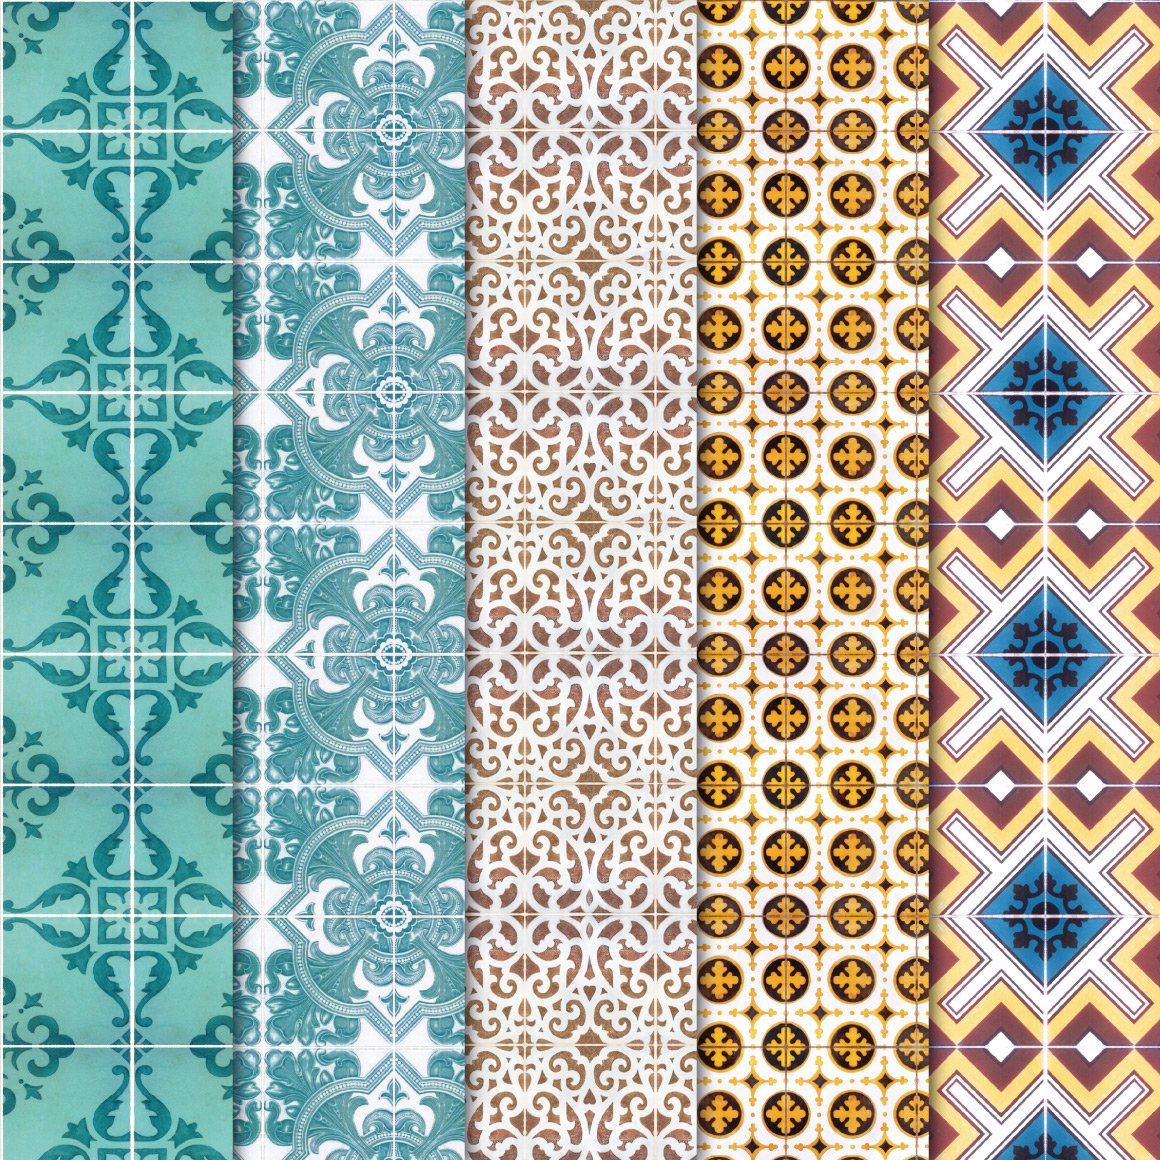 This is so beautiful Lisbon tiles collection.